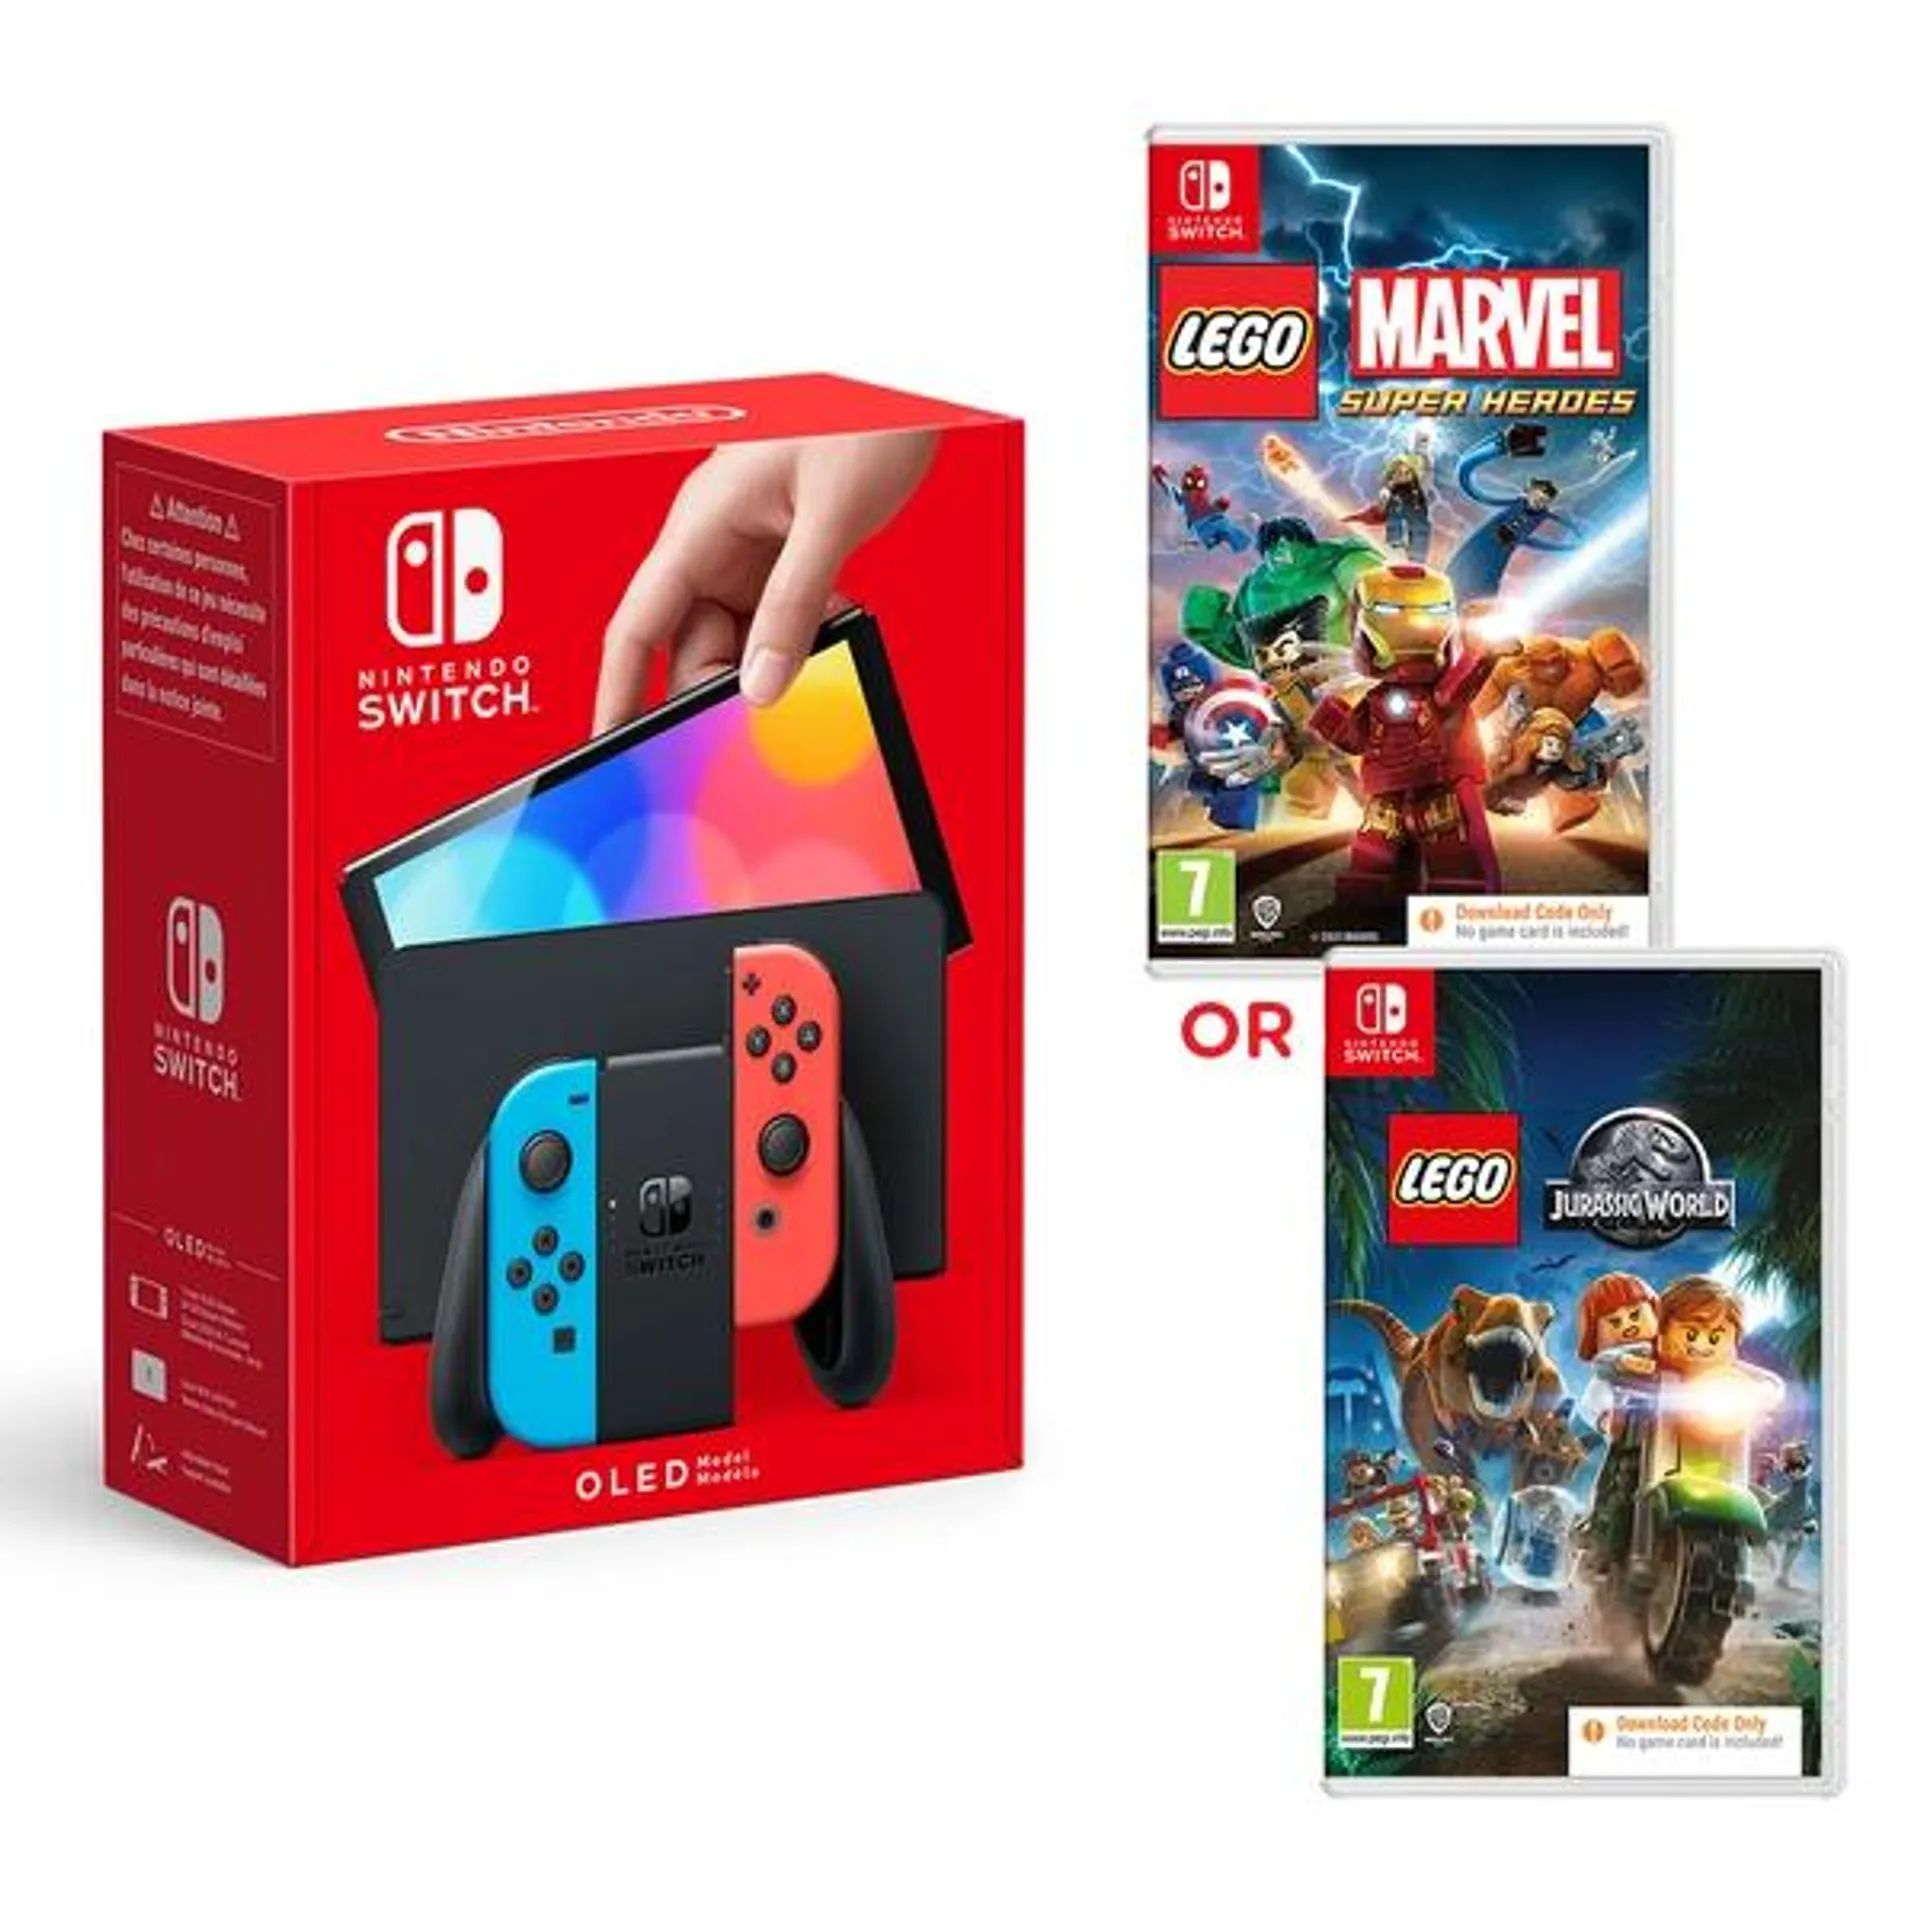 Nintendo Switch OLED Neon Console & Select LEGO Code in Box Game